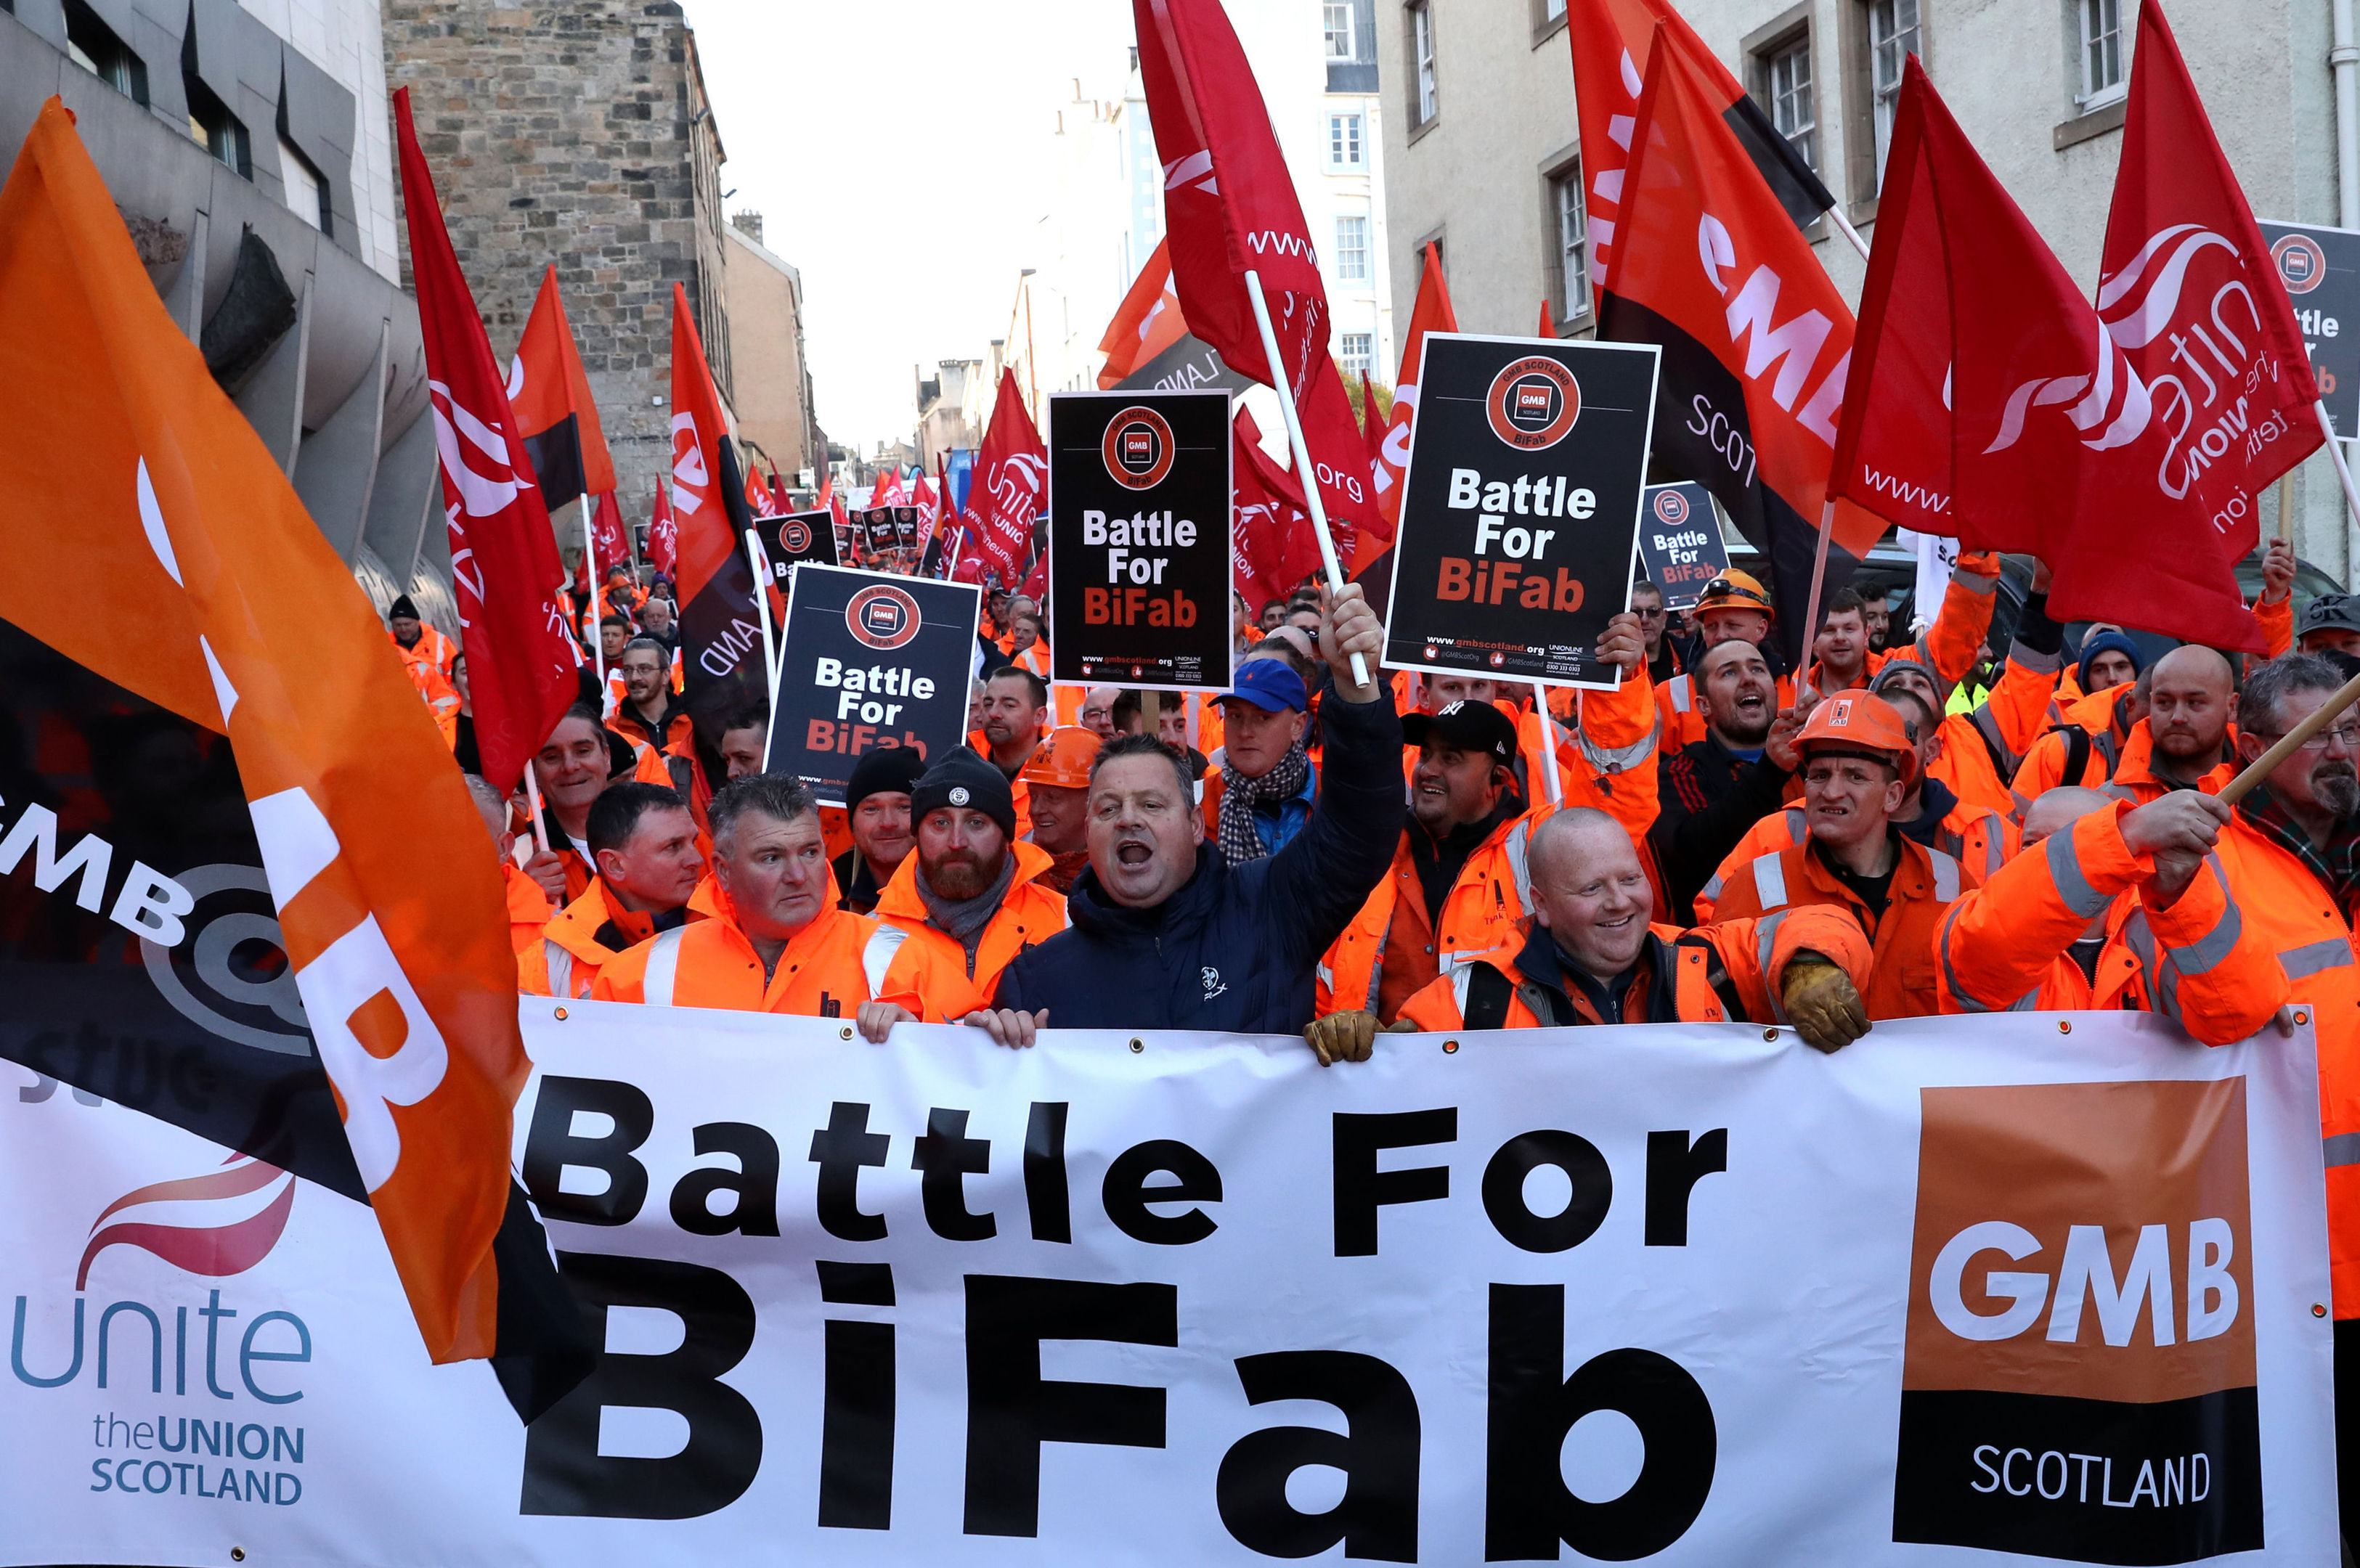 Workers from crisis-hit fabrication firm BiFab march through Edinburgh to the Scottish Parliament in a bid to raise awareness of their plight. PRESS ASSOCIATION Photo. Picture date: Thursday November 16, 2017. See PA story INDUSTRY BiFab. Photo credit should read: Andrew Milligan/PA Wire